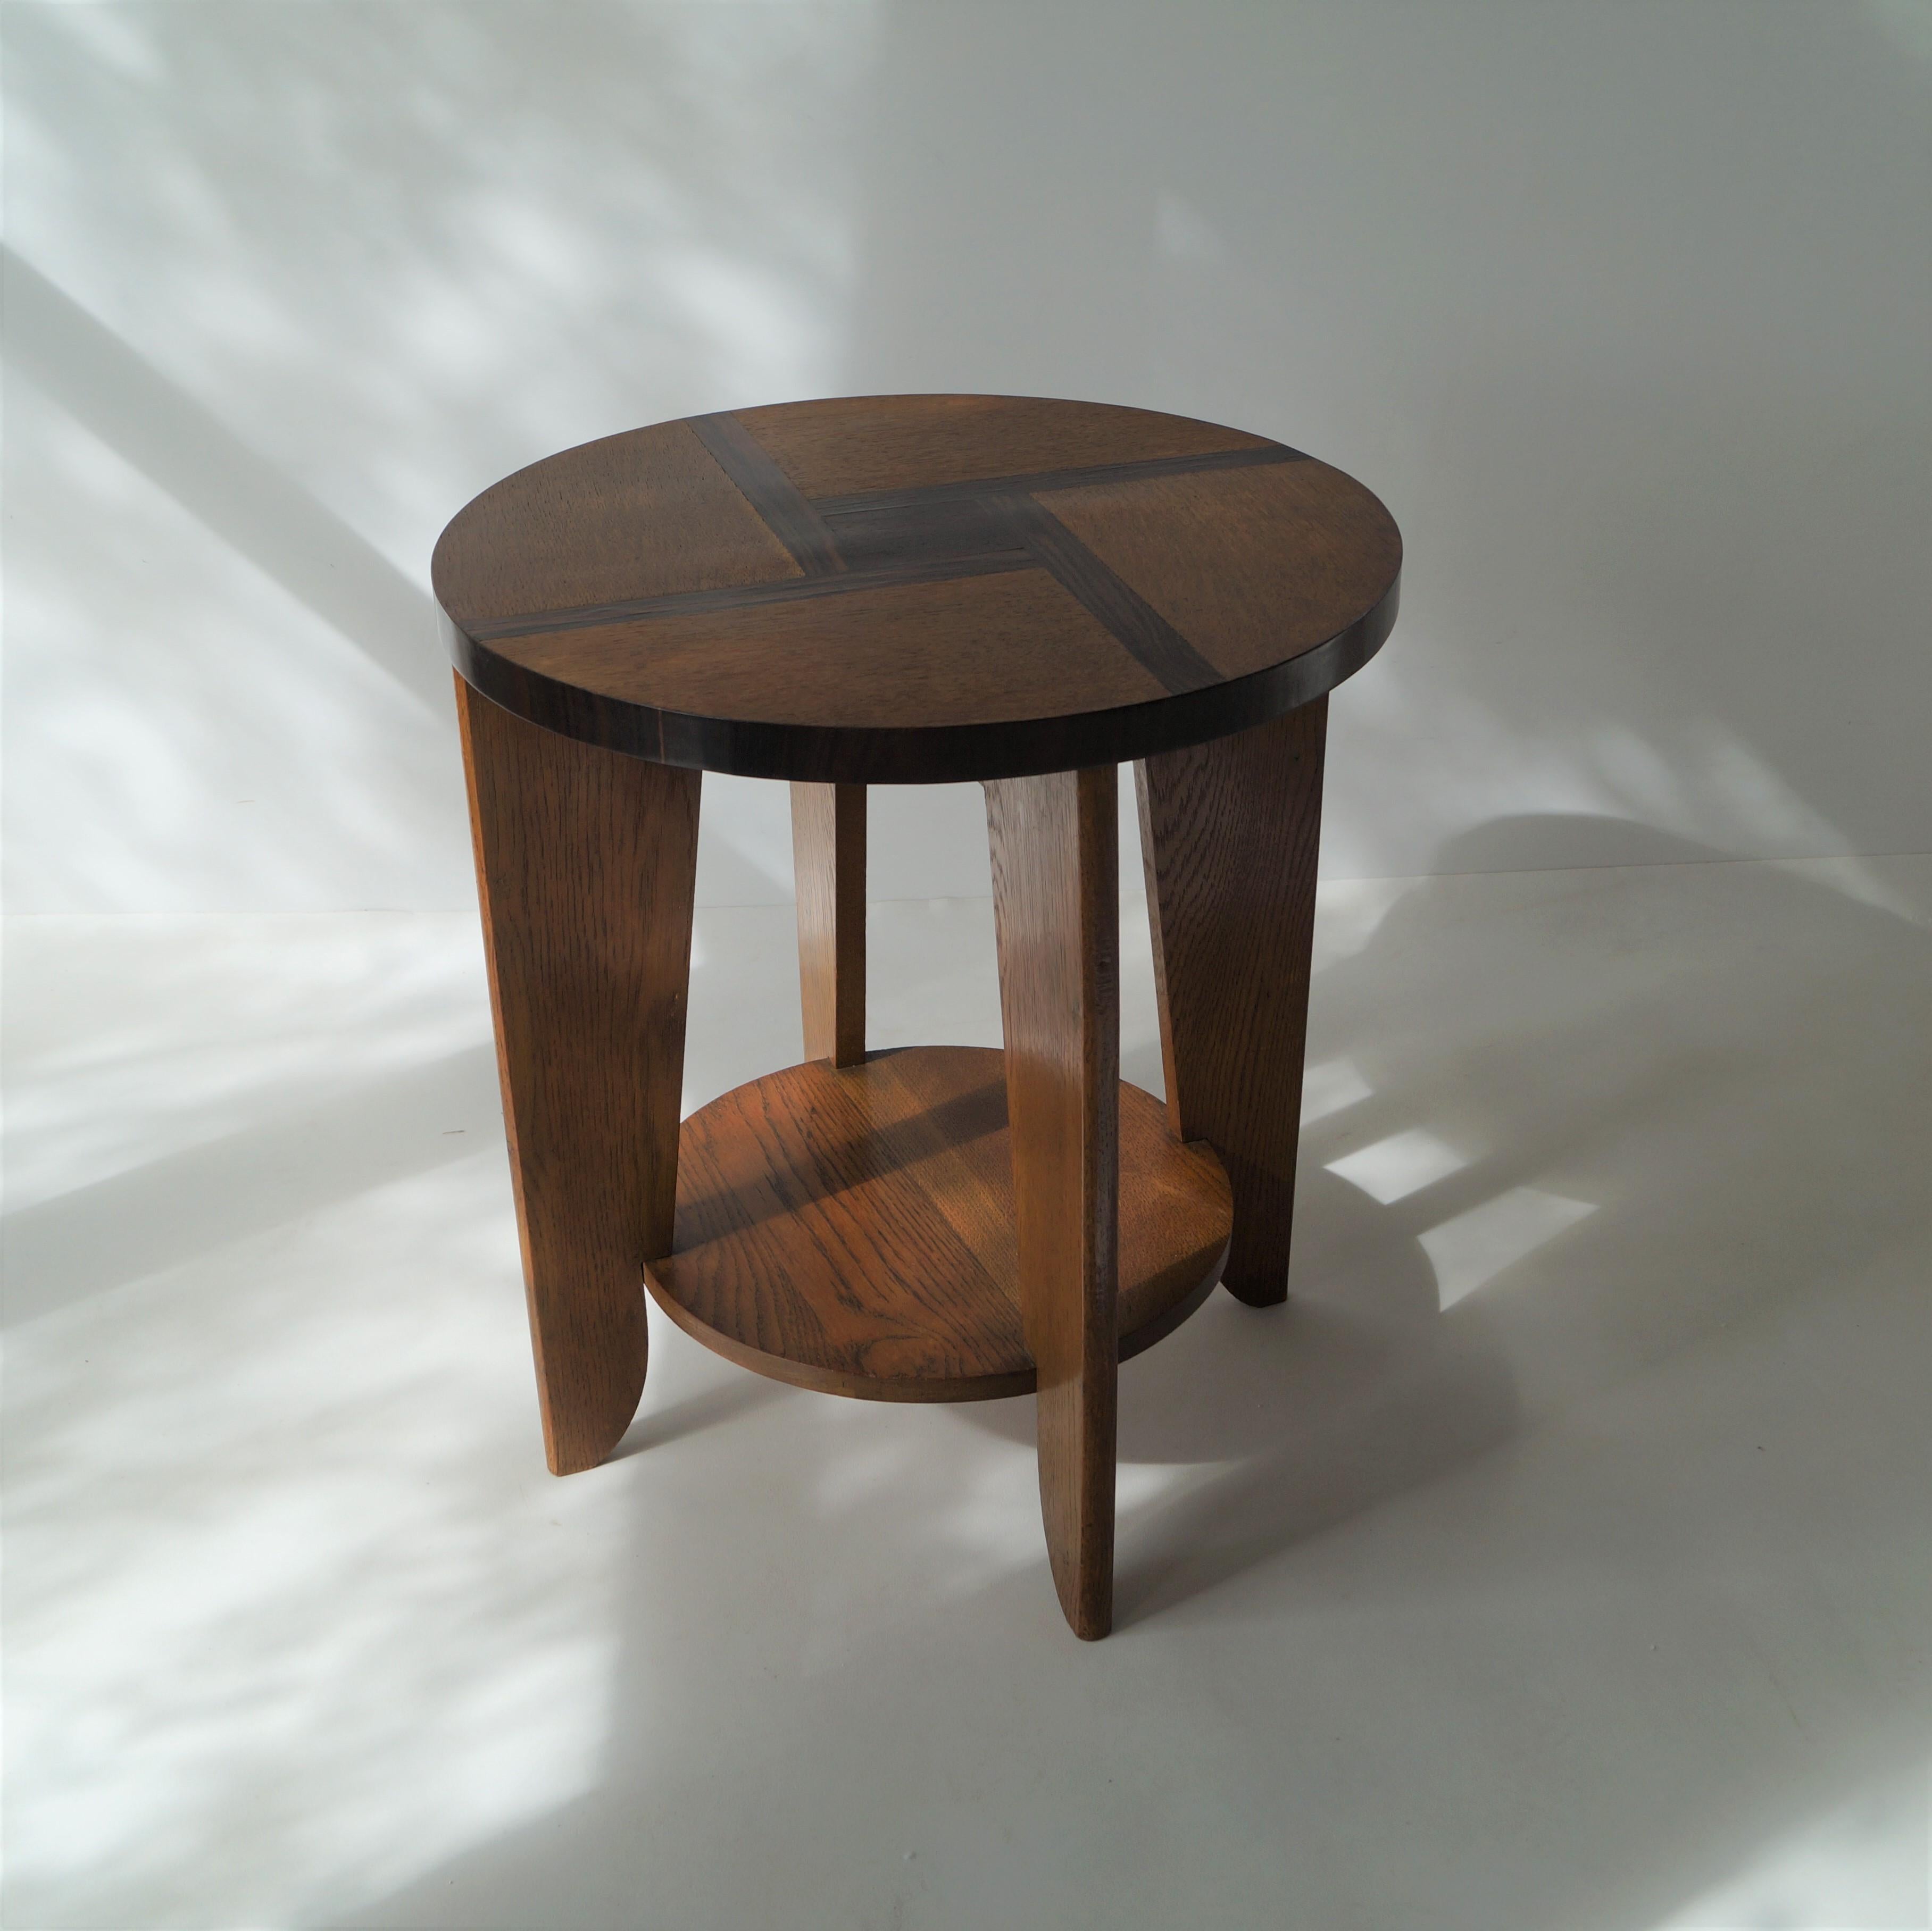 Dutch Art Deco Occasional Table Haagse School, 1930s For Sale 12